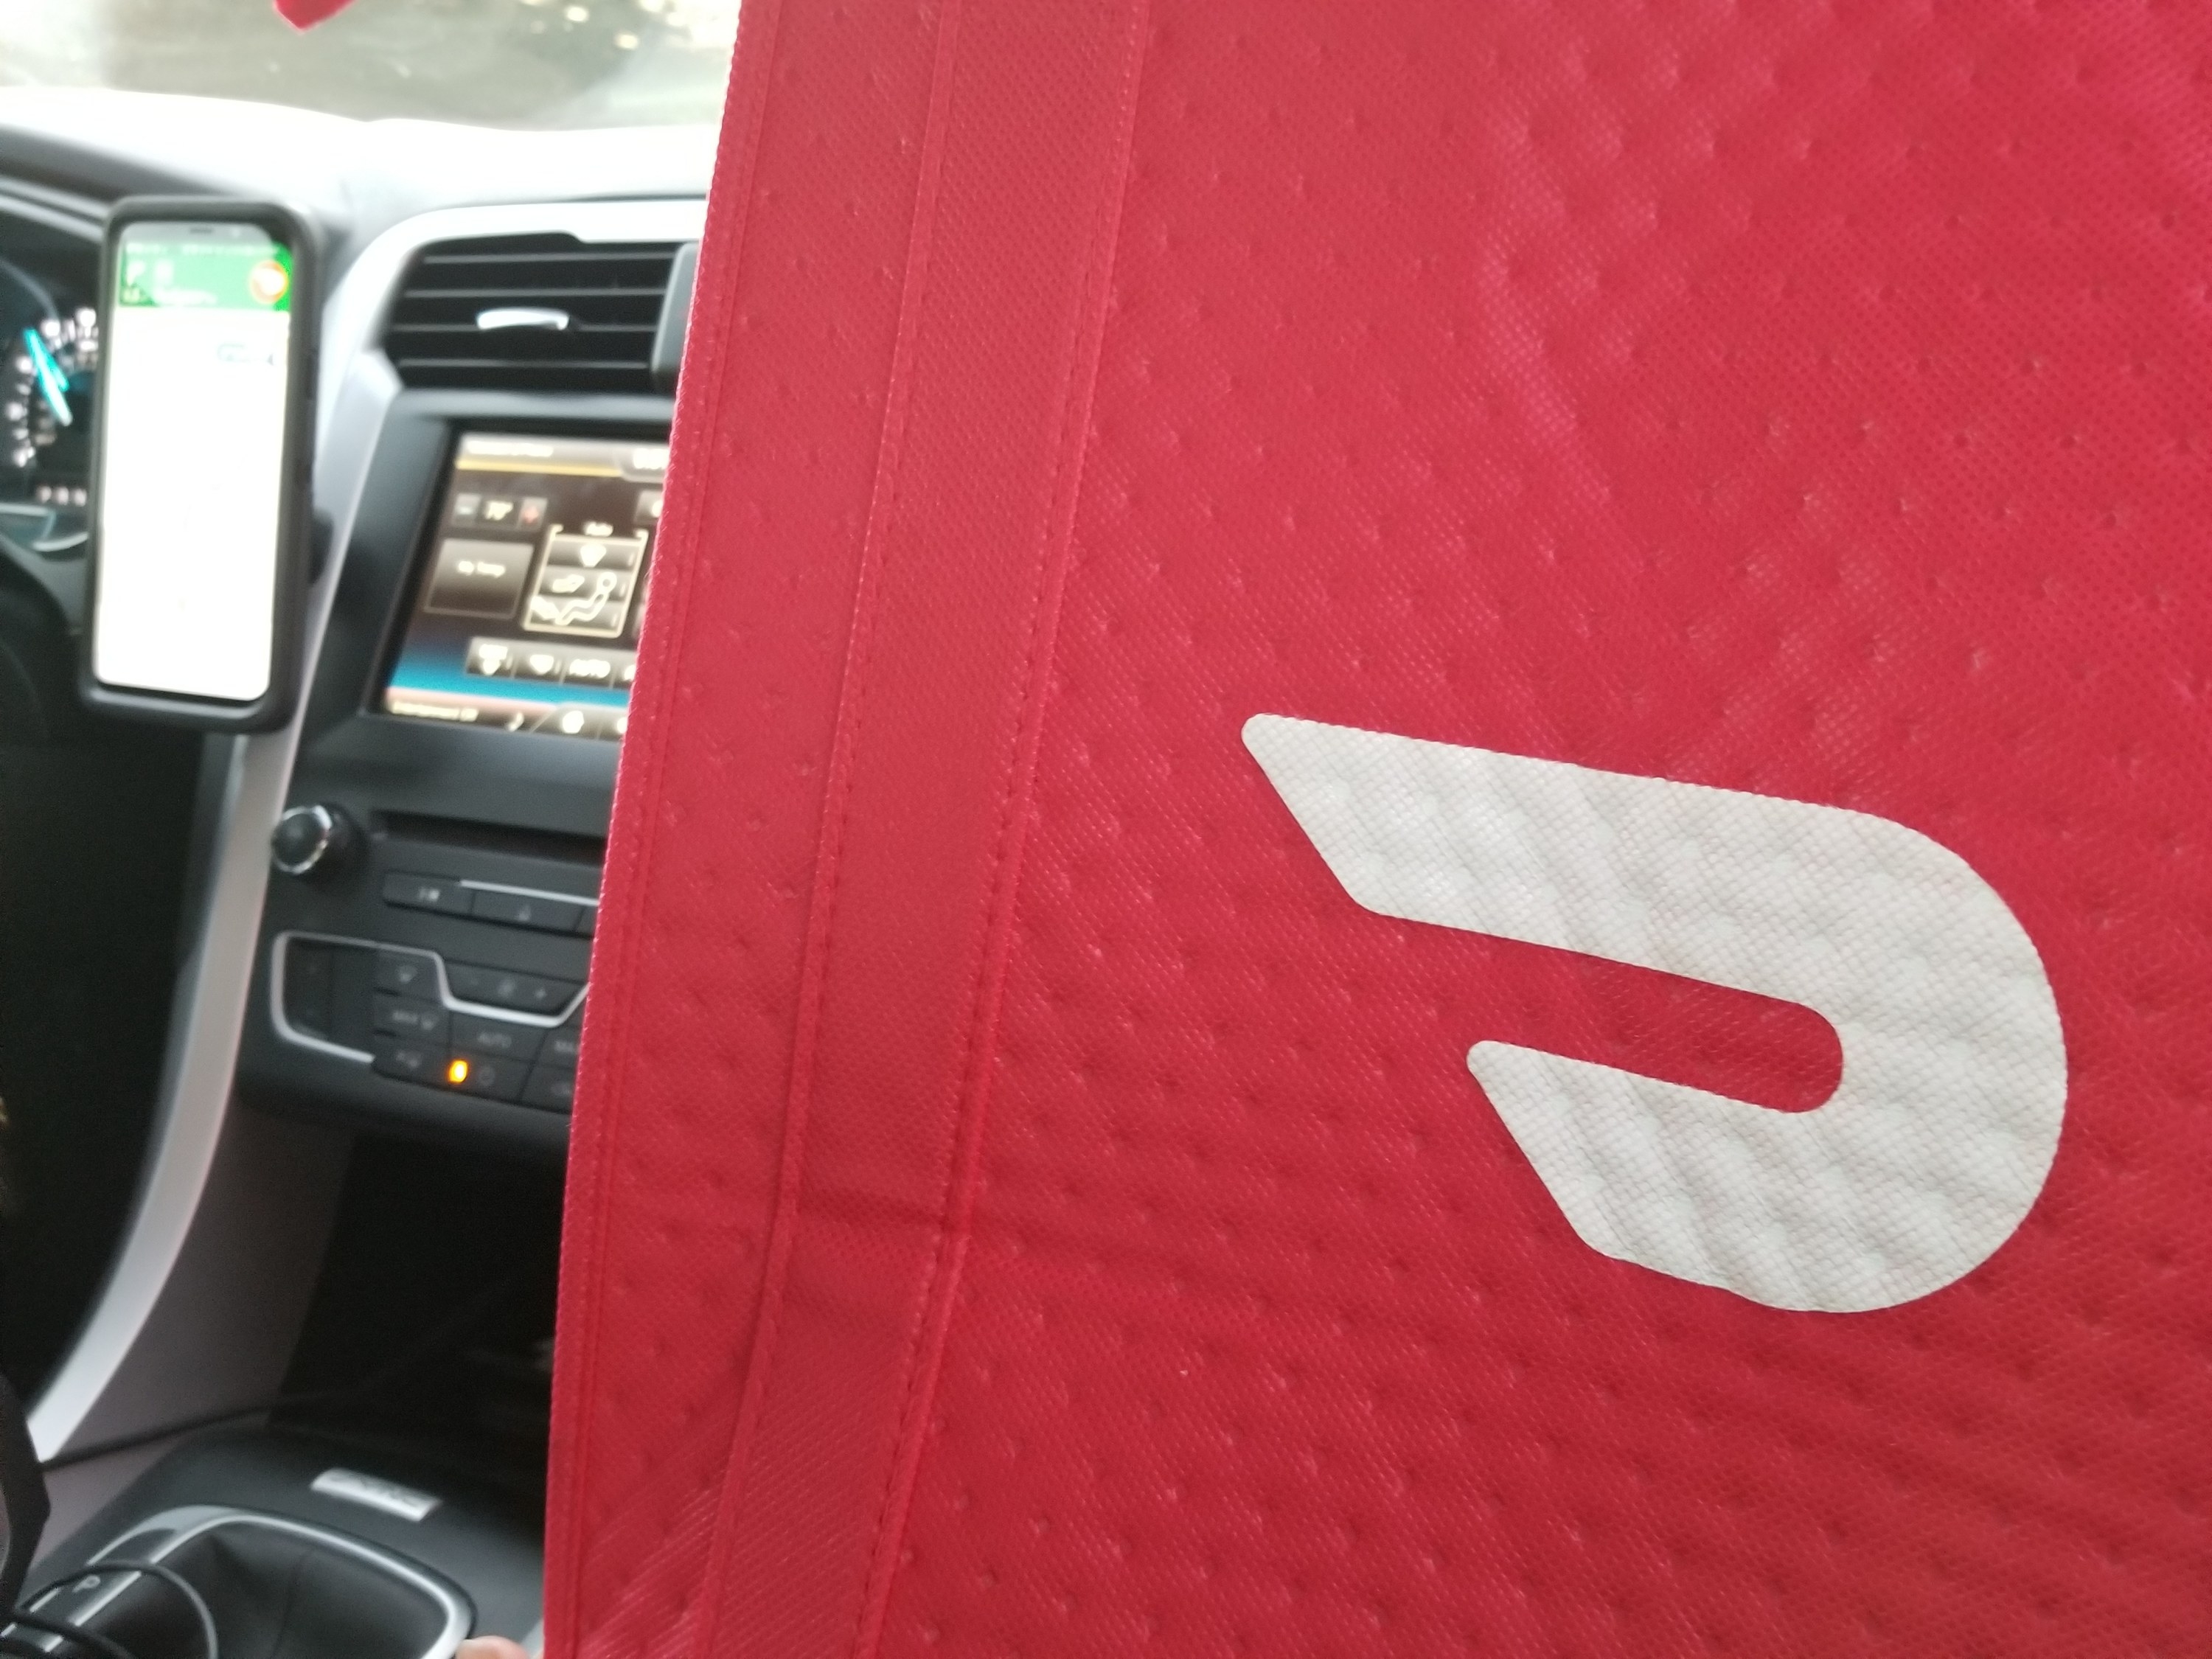 A DoorDash delivery bag is seen in the front seat of a car